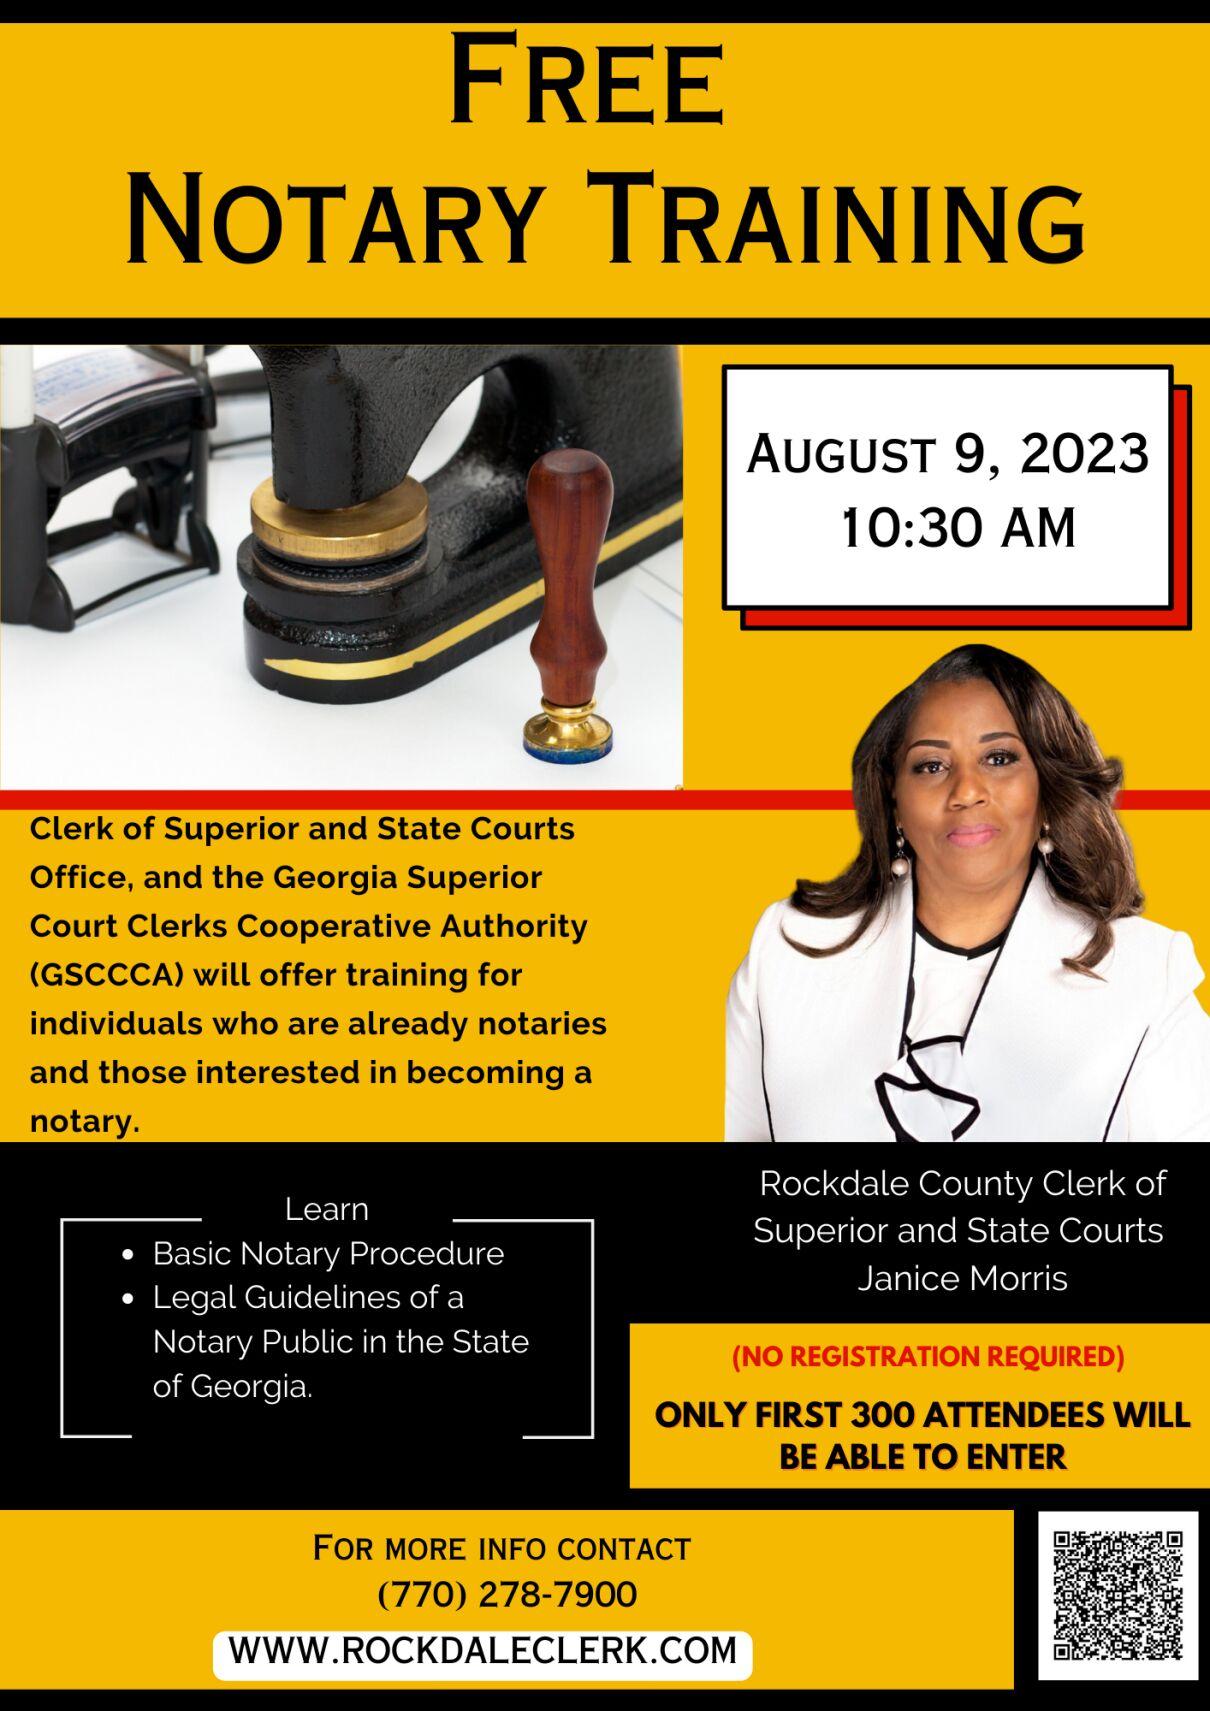 Rockdale County Clerk of Courts Janice Morris offers free notary